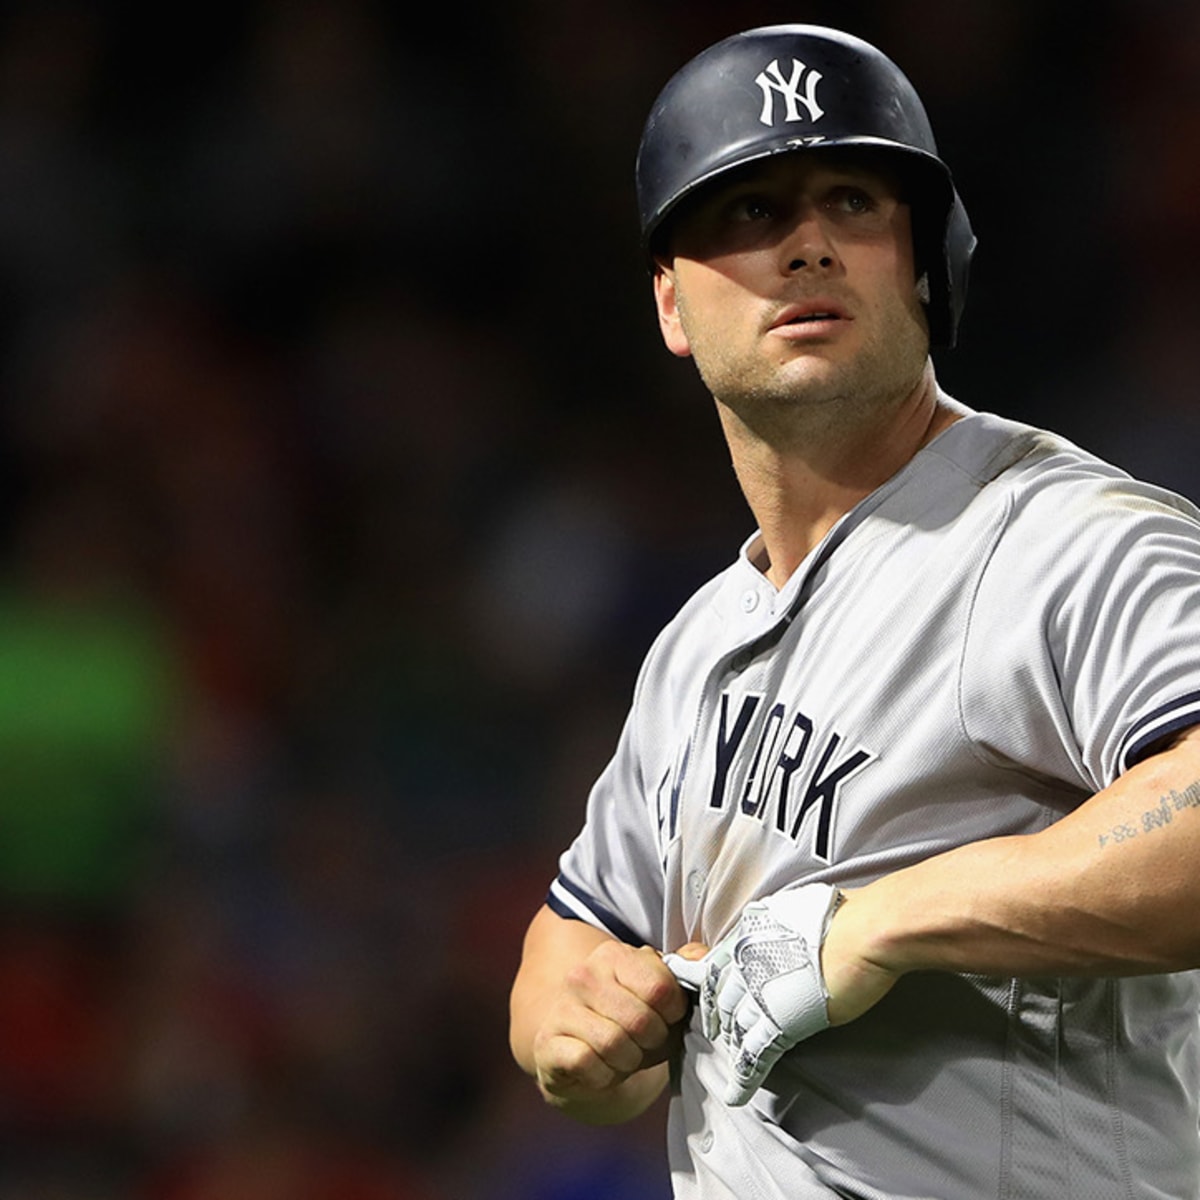 REPORT: Matt Holliday would consider playing first base for the